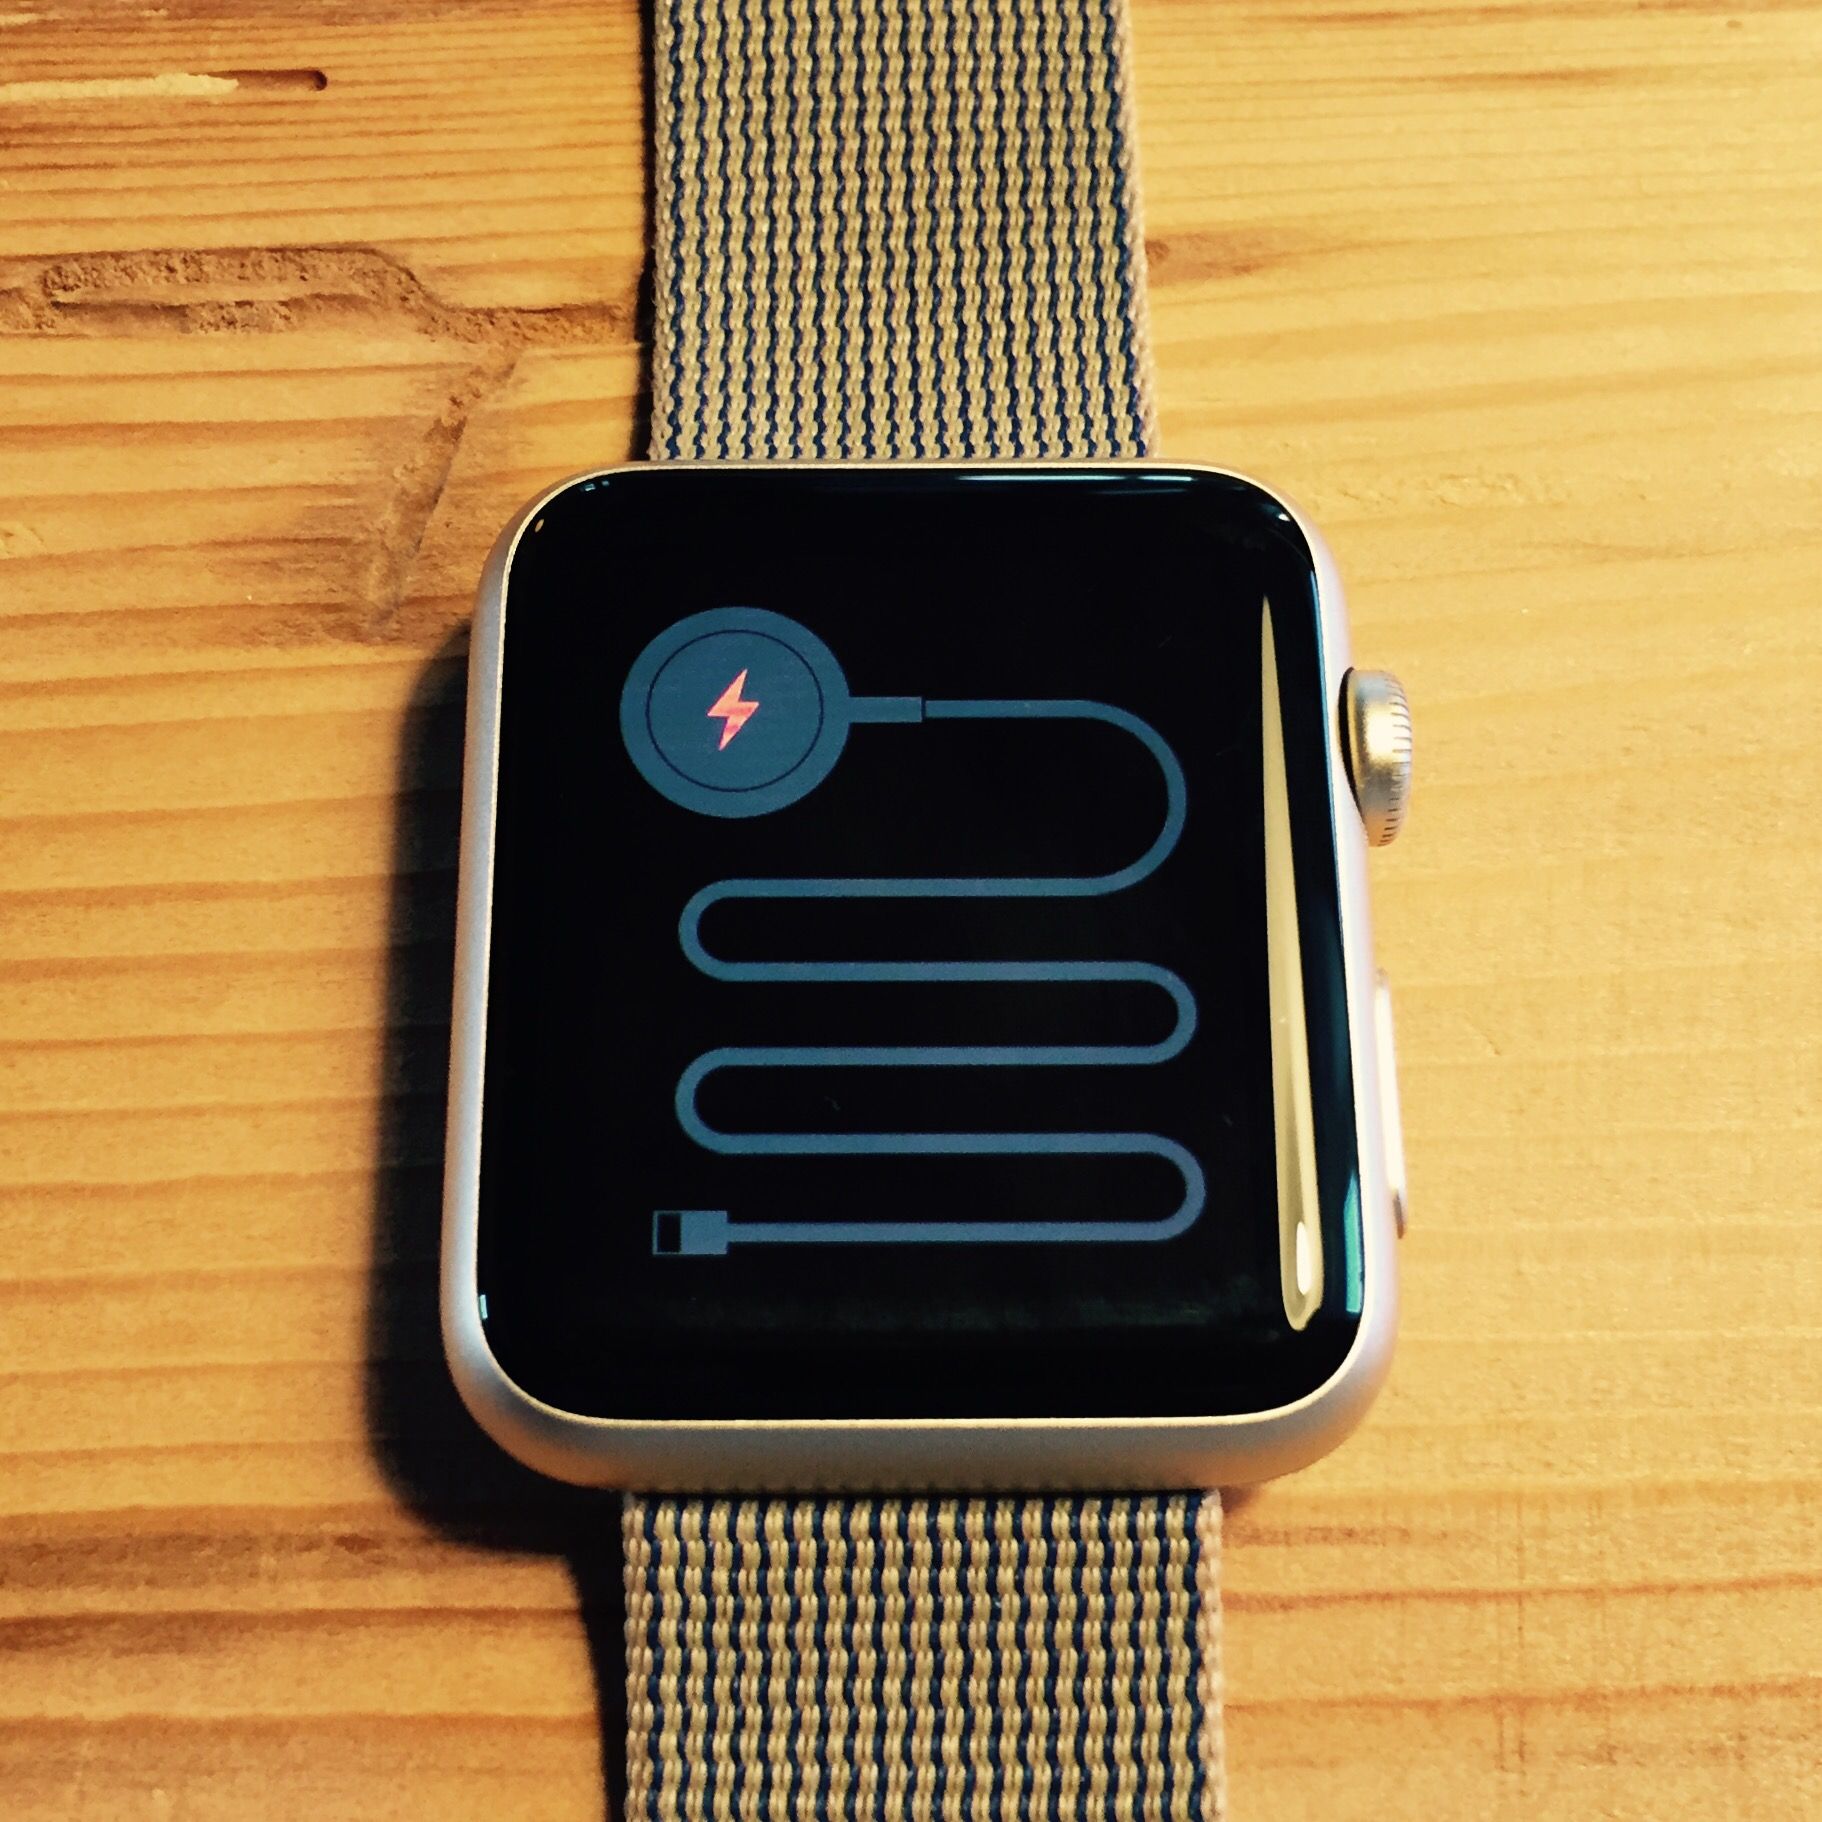 Apple Watch Snake – nothing pretty about that